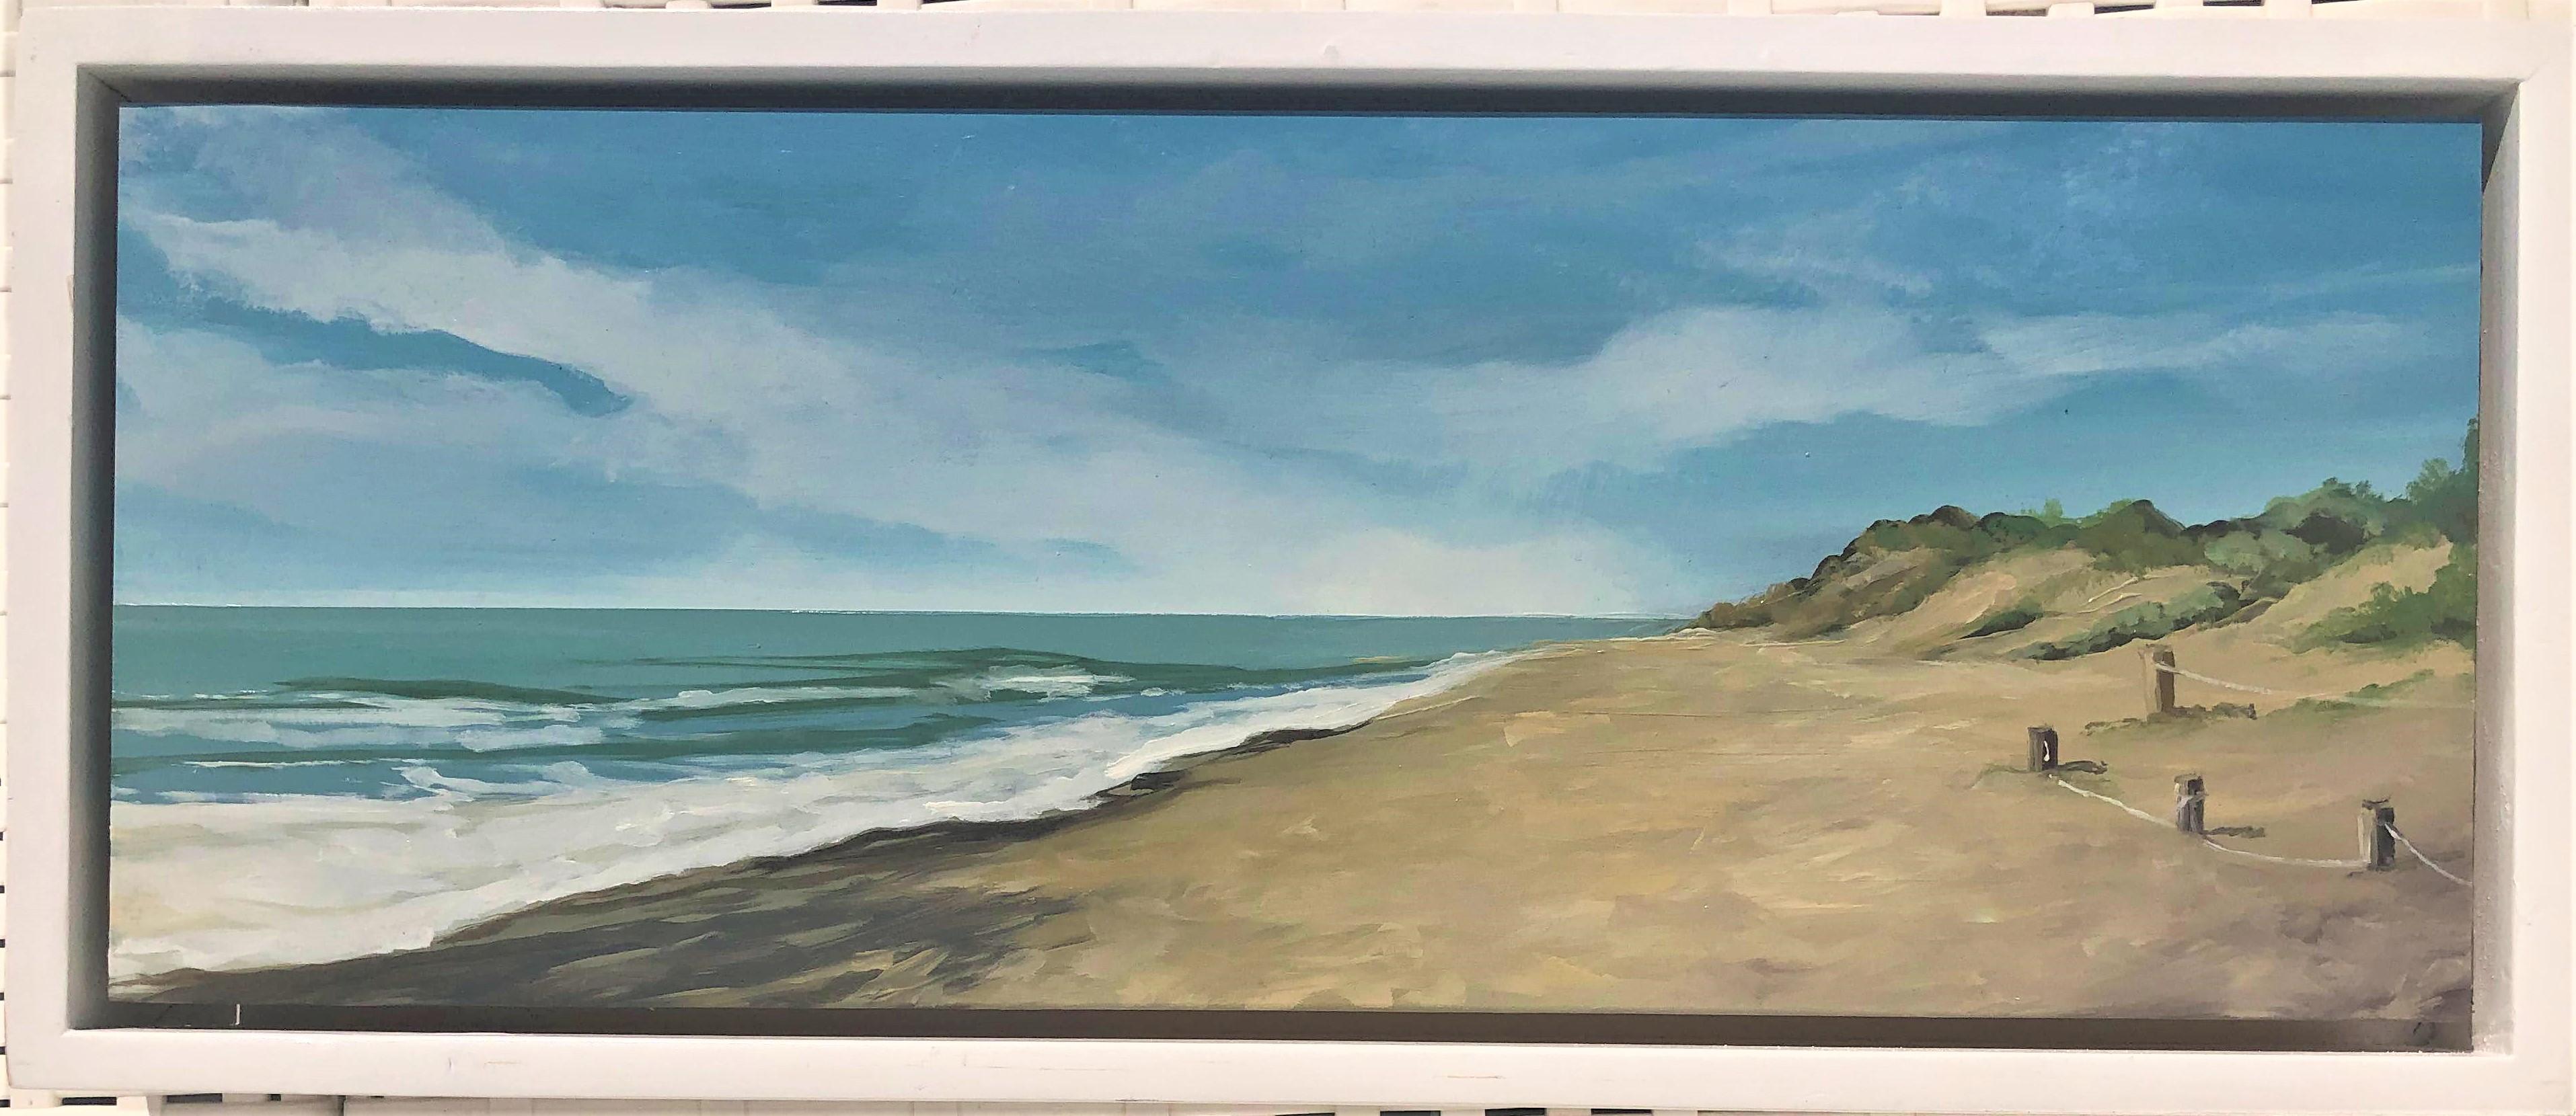 Beach with dunes oil paint on board seascape - Painting by Alberto Biesok